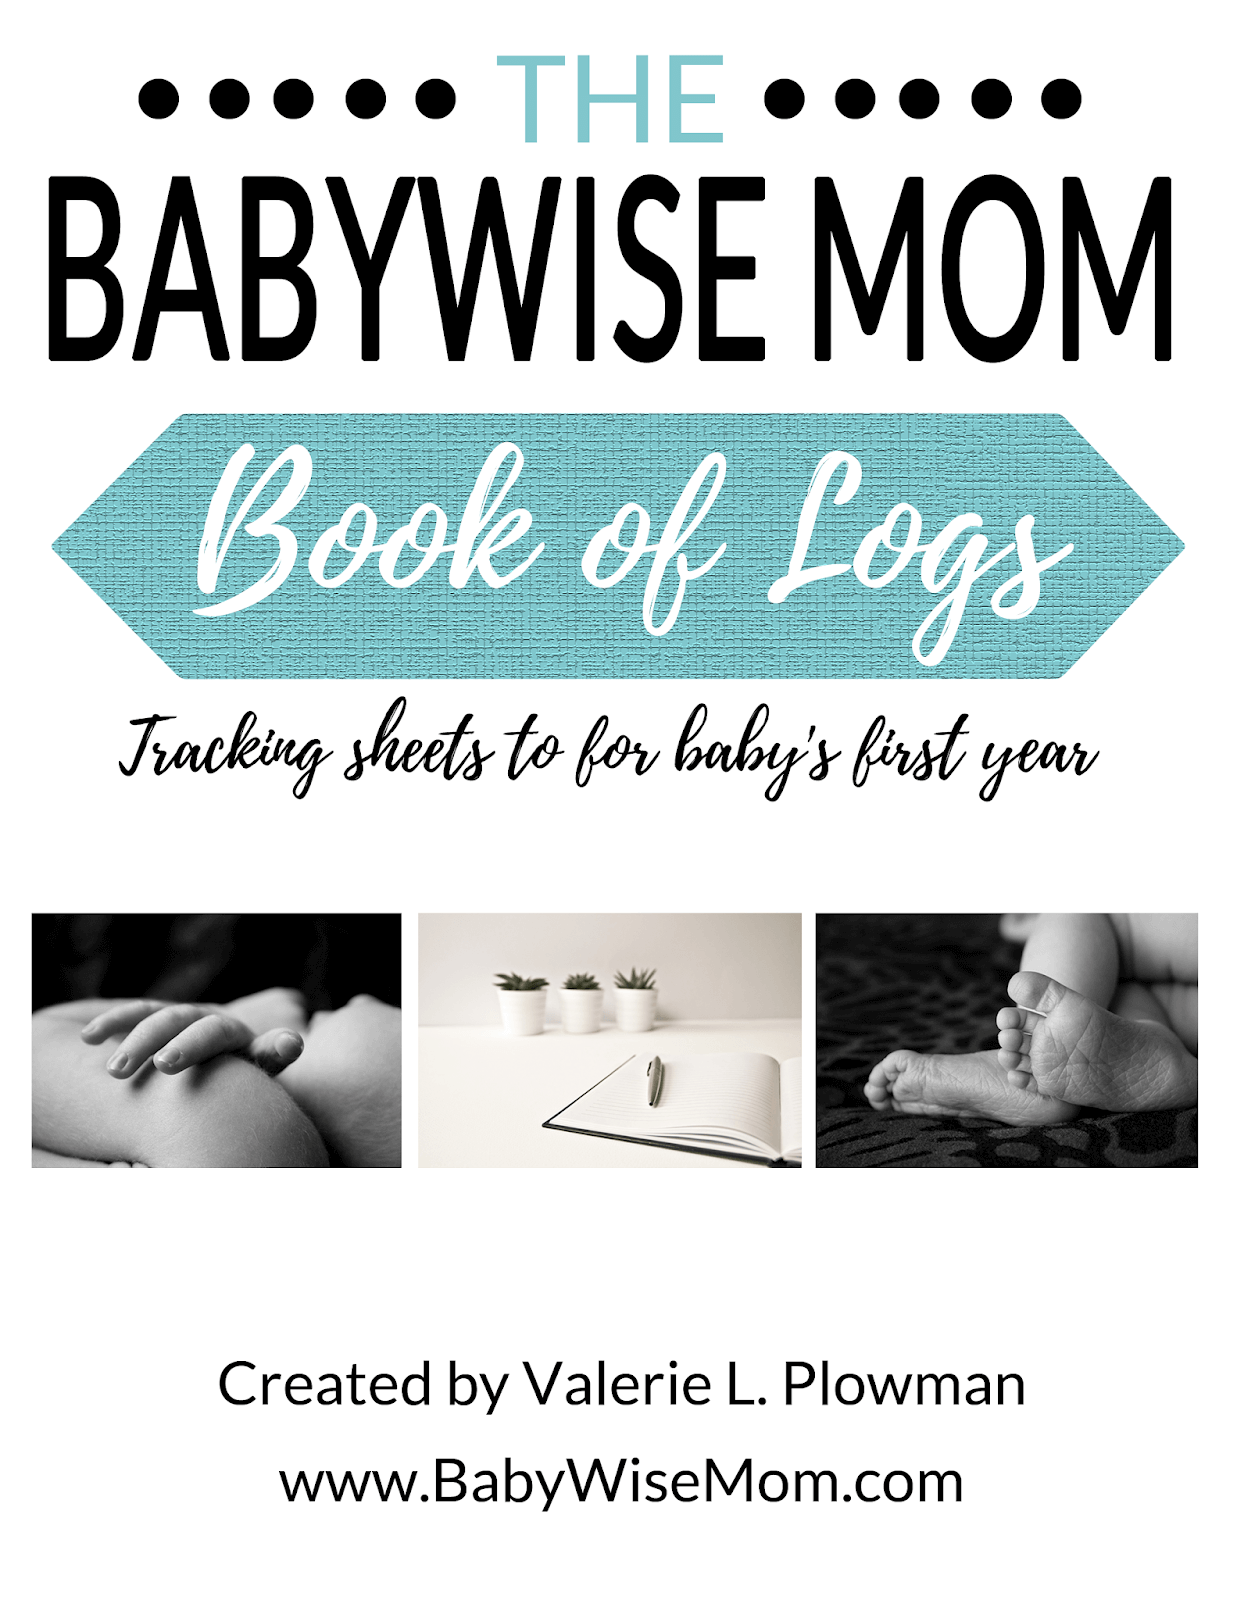  Chronicles of a Babywise Mom Book of Logs